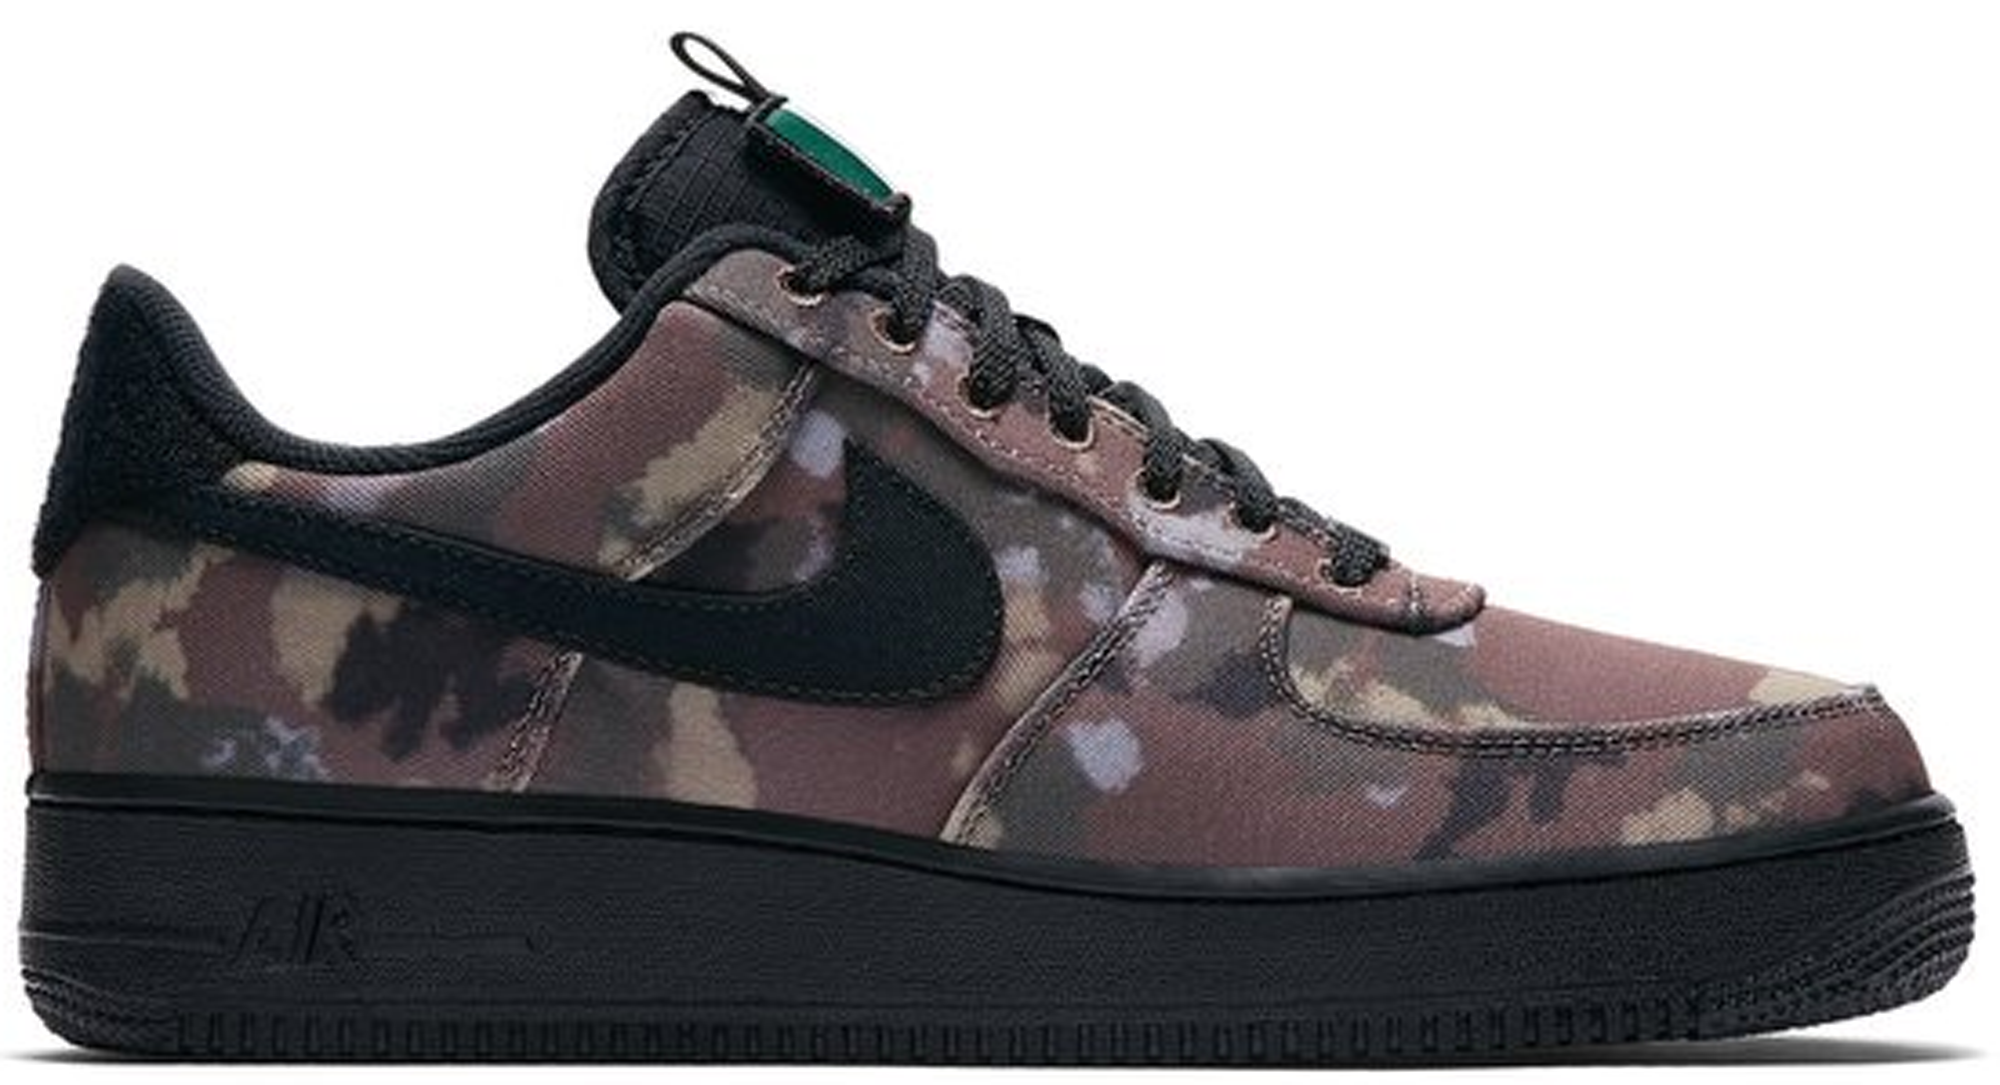 nike air force 1 low camo